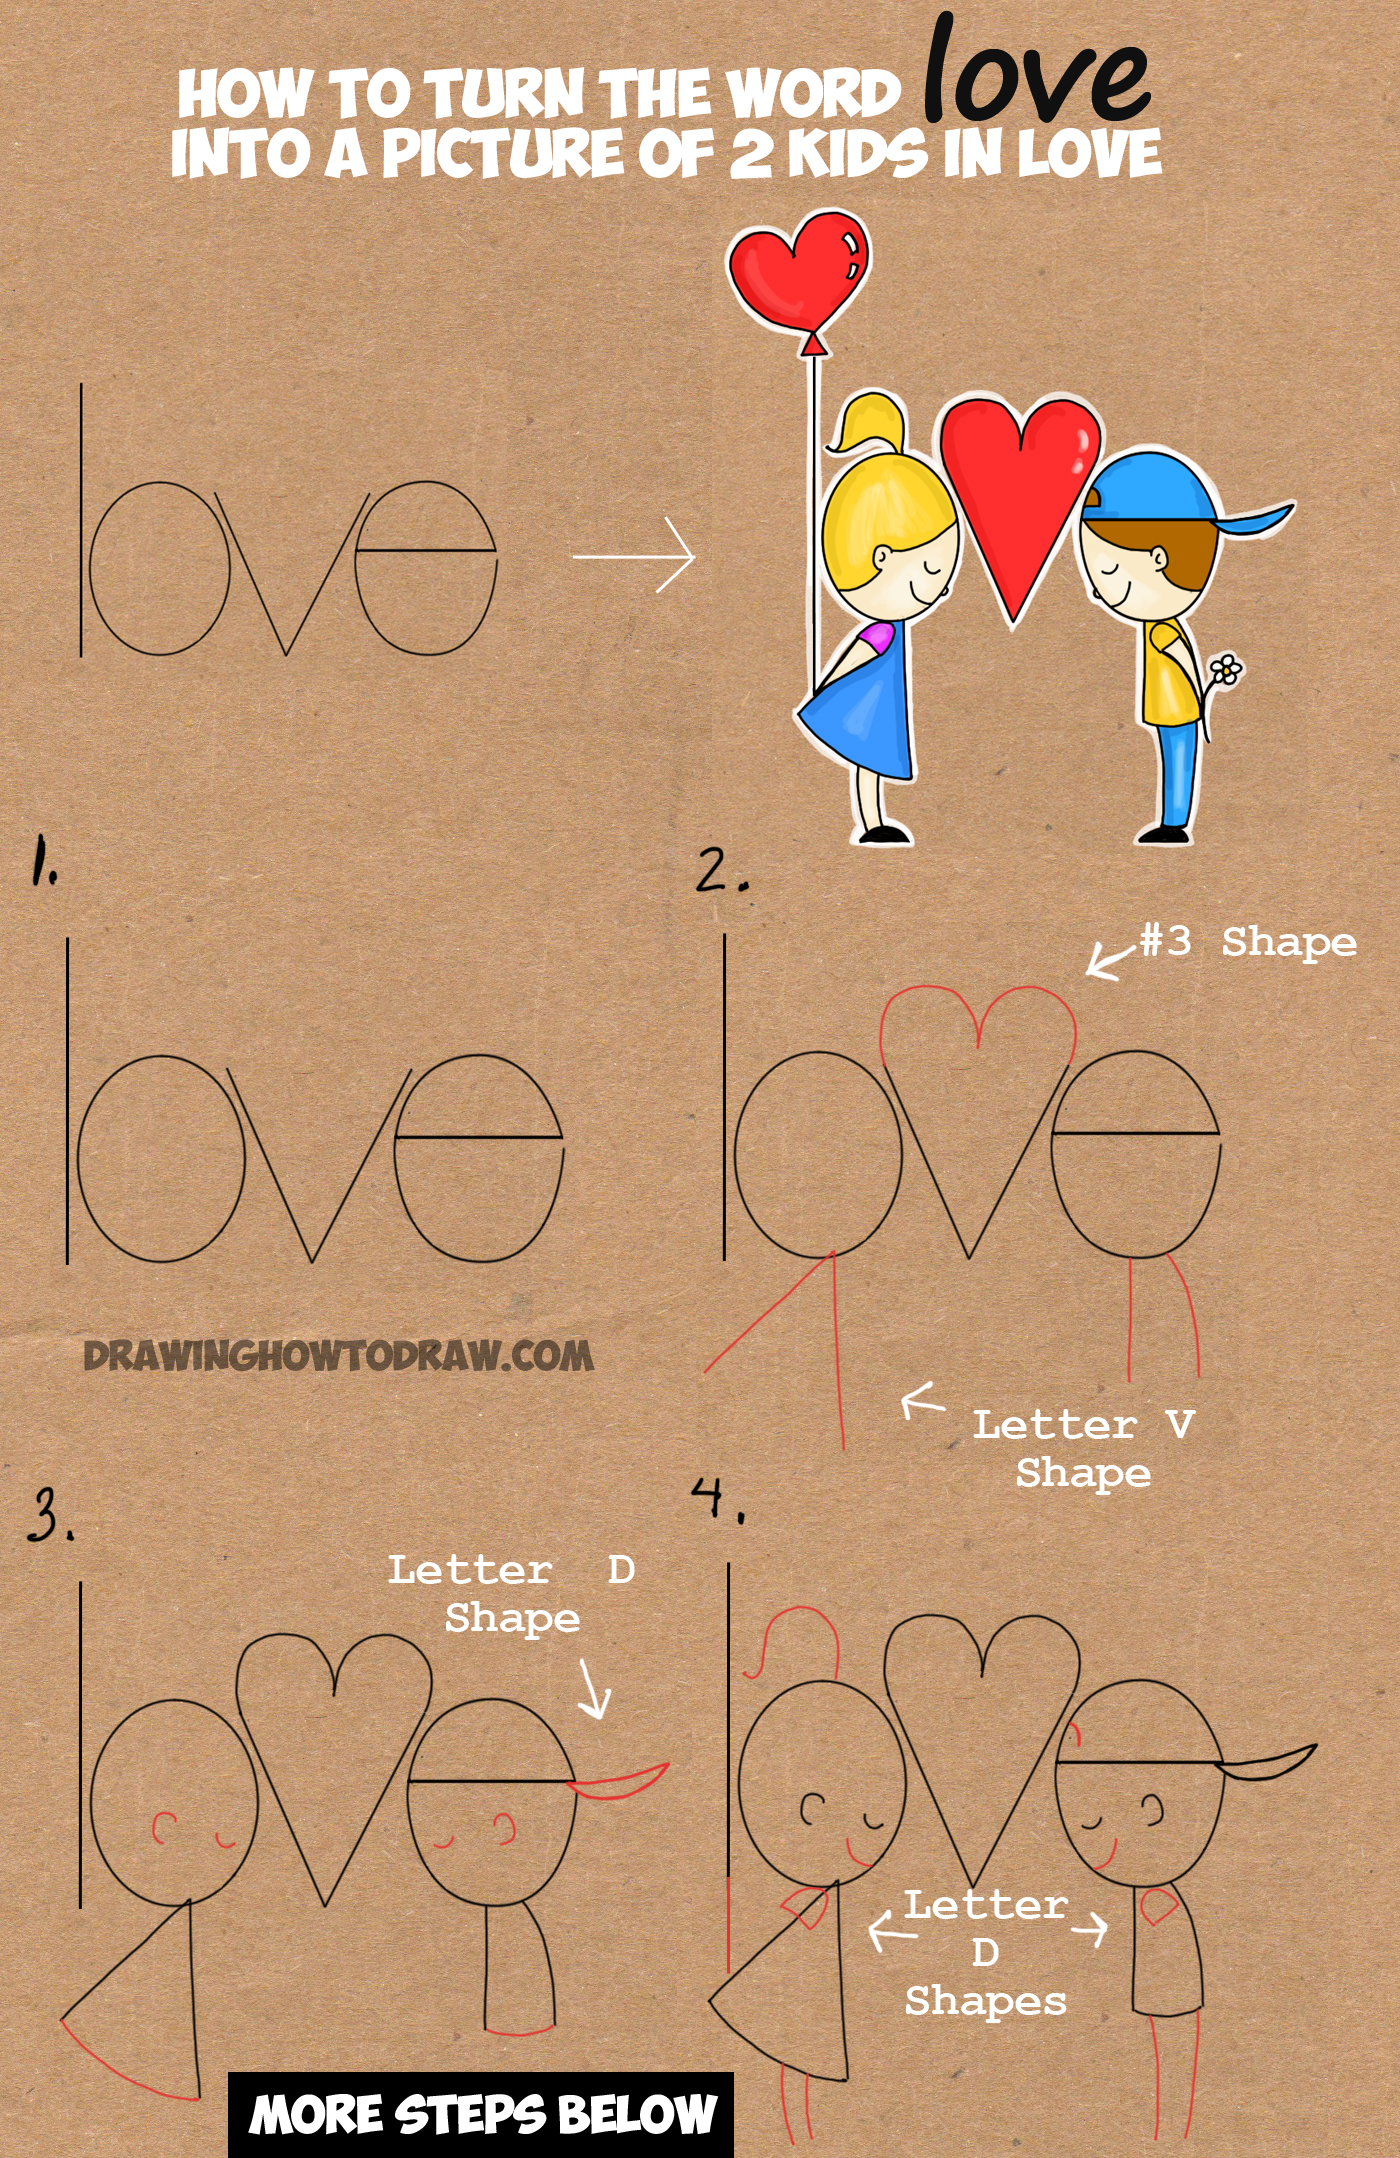 How to Draw Cartoon Kids in Love from the Word Love in this Easy Words Cartoon  Drawing Tutorial for Kids - How to Draw Step by Step Drawing Tutorials